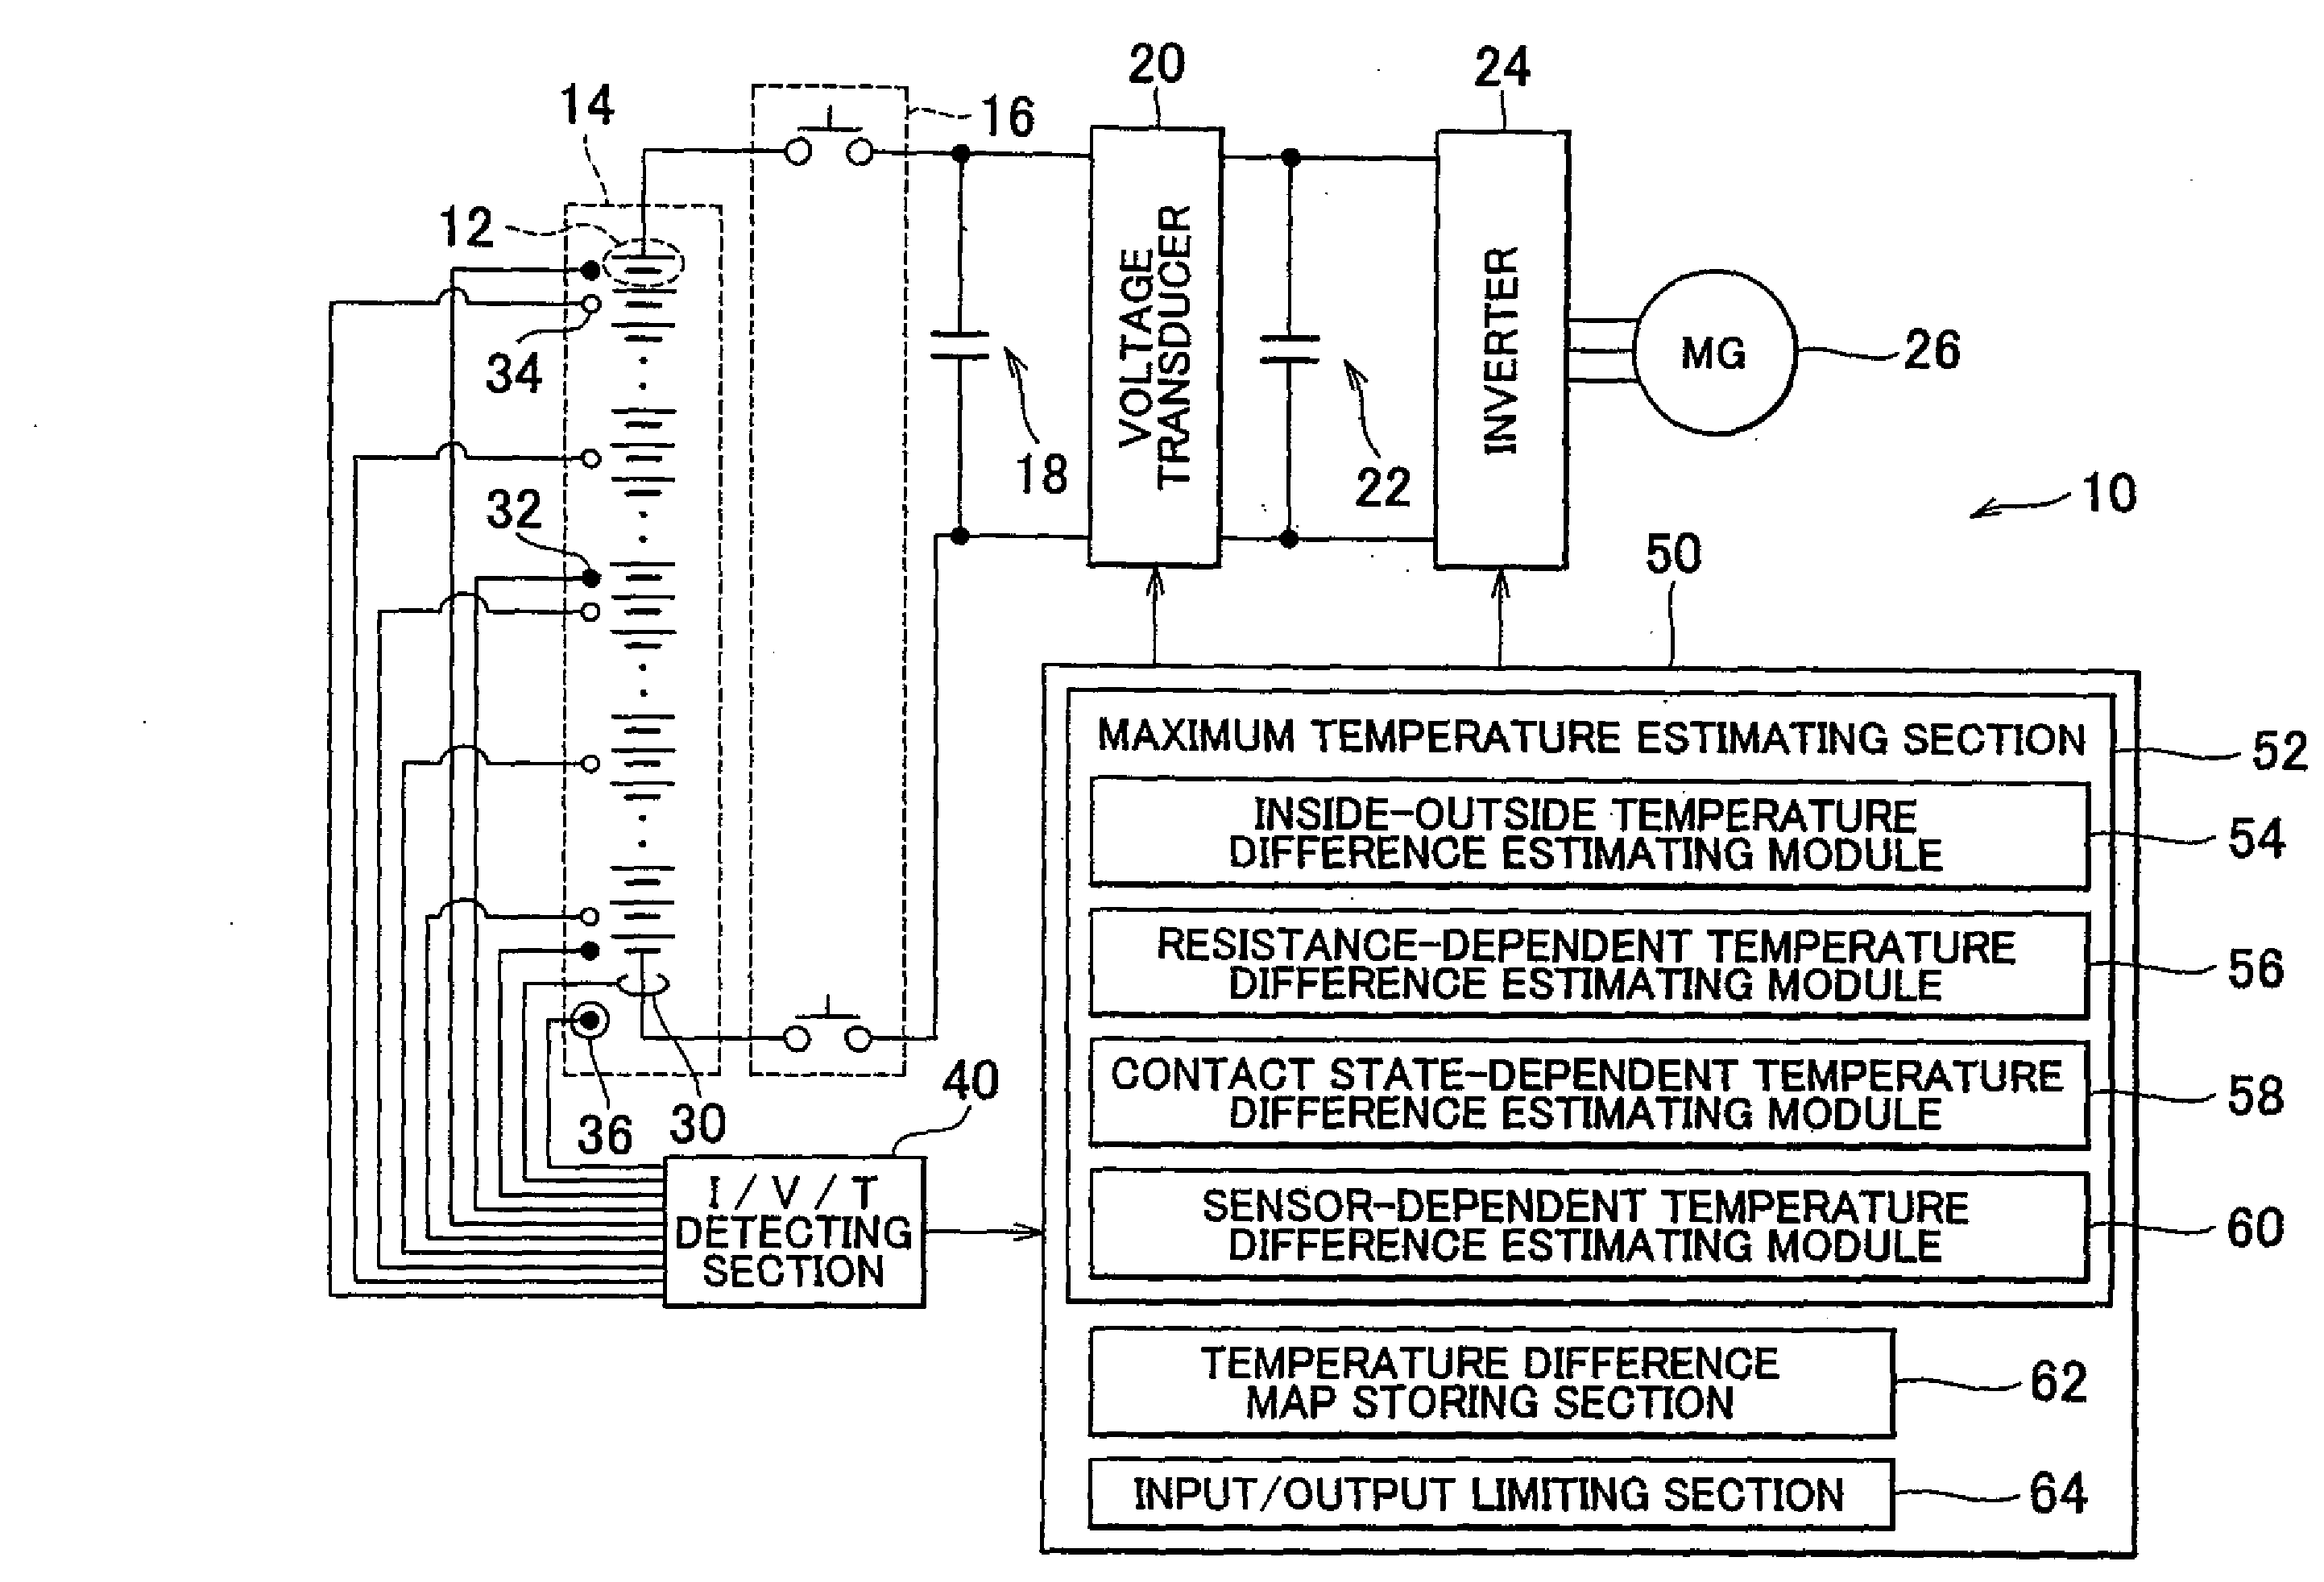 Battery pack input/output control system